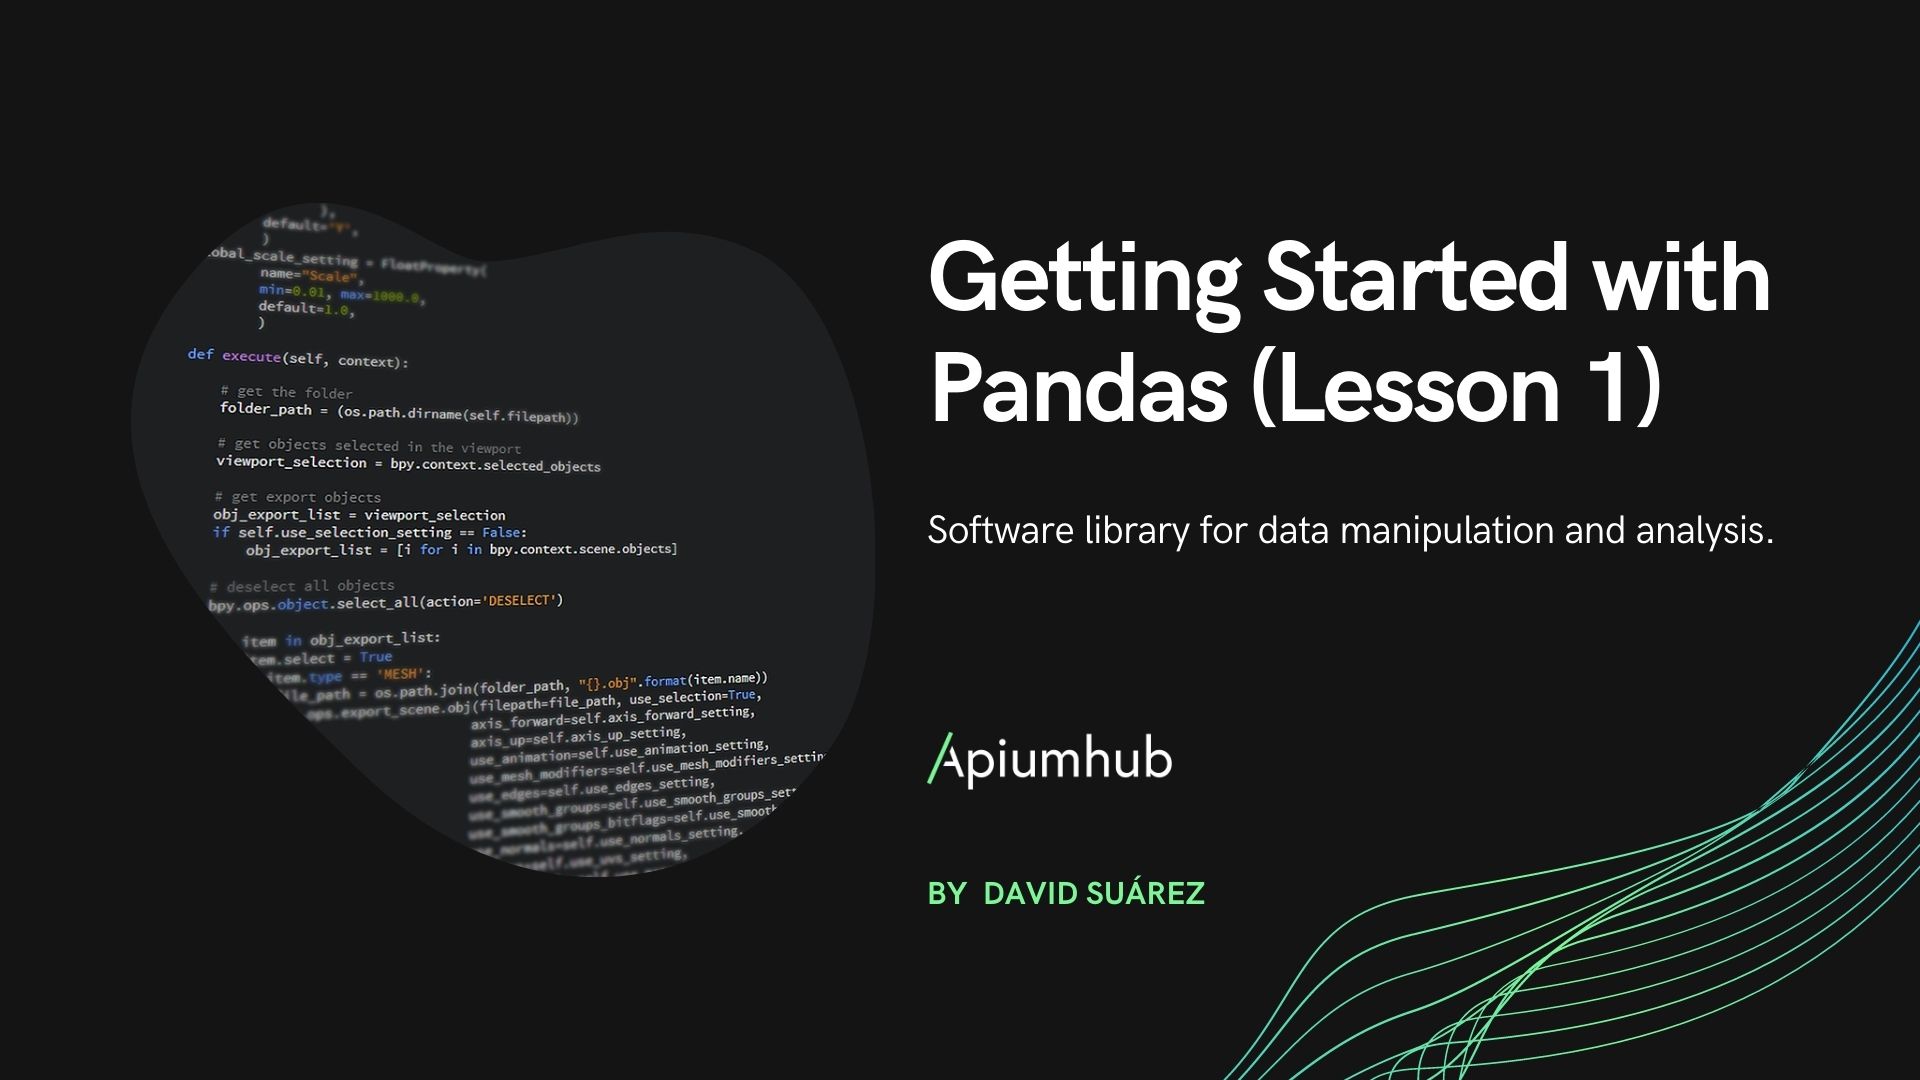 Getting Started with Pandas - Lesson 1